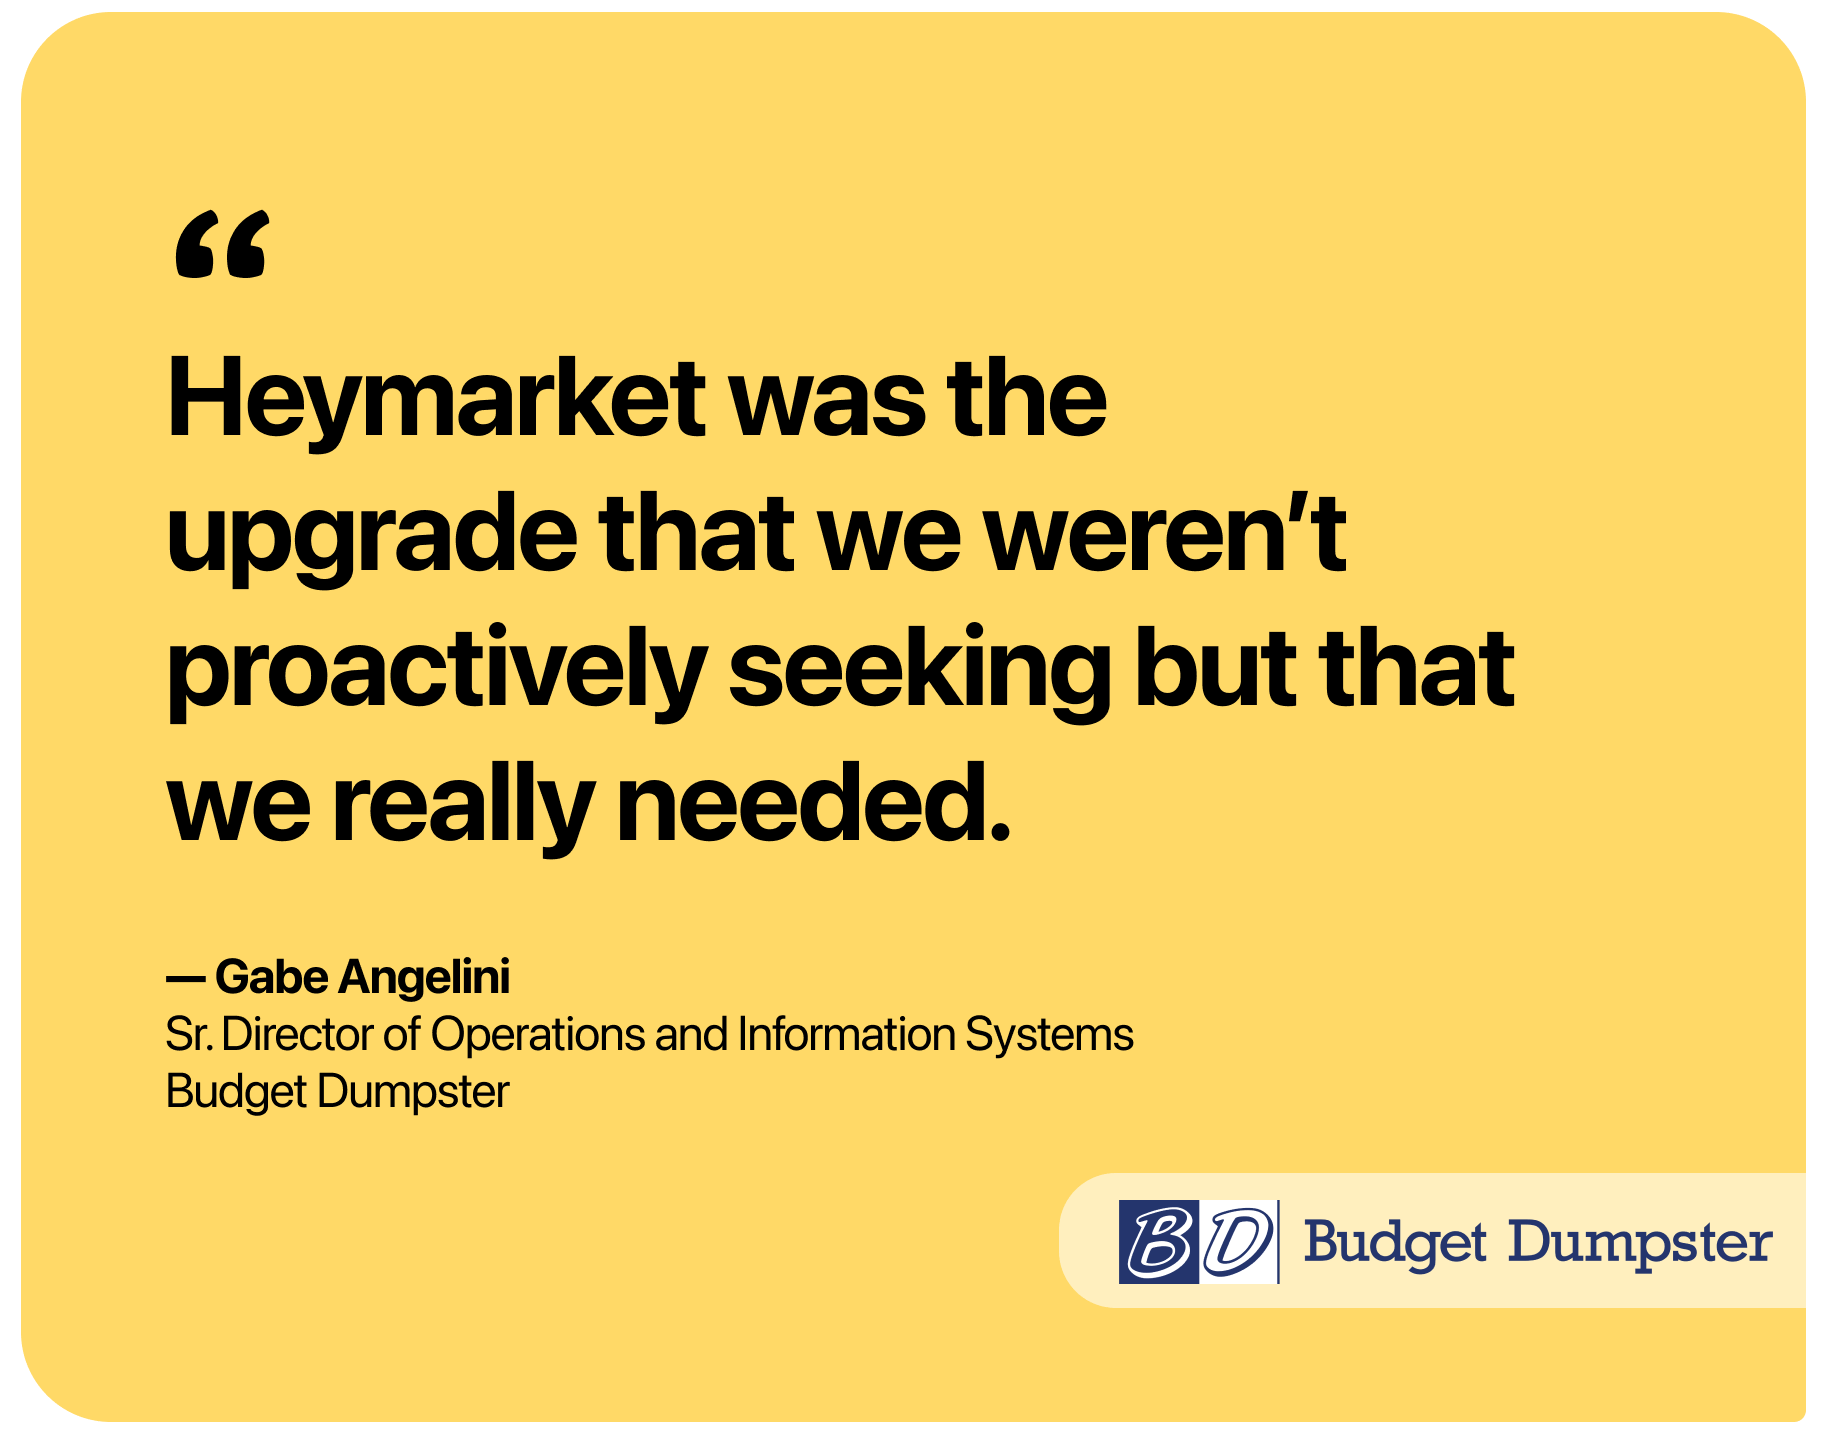 Quote reading: Heymarket was the upgrade that we weren’t proactively seeking but that we really needed.